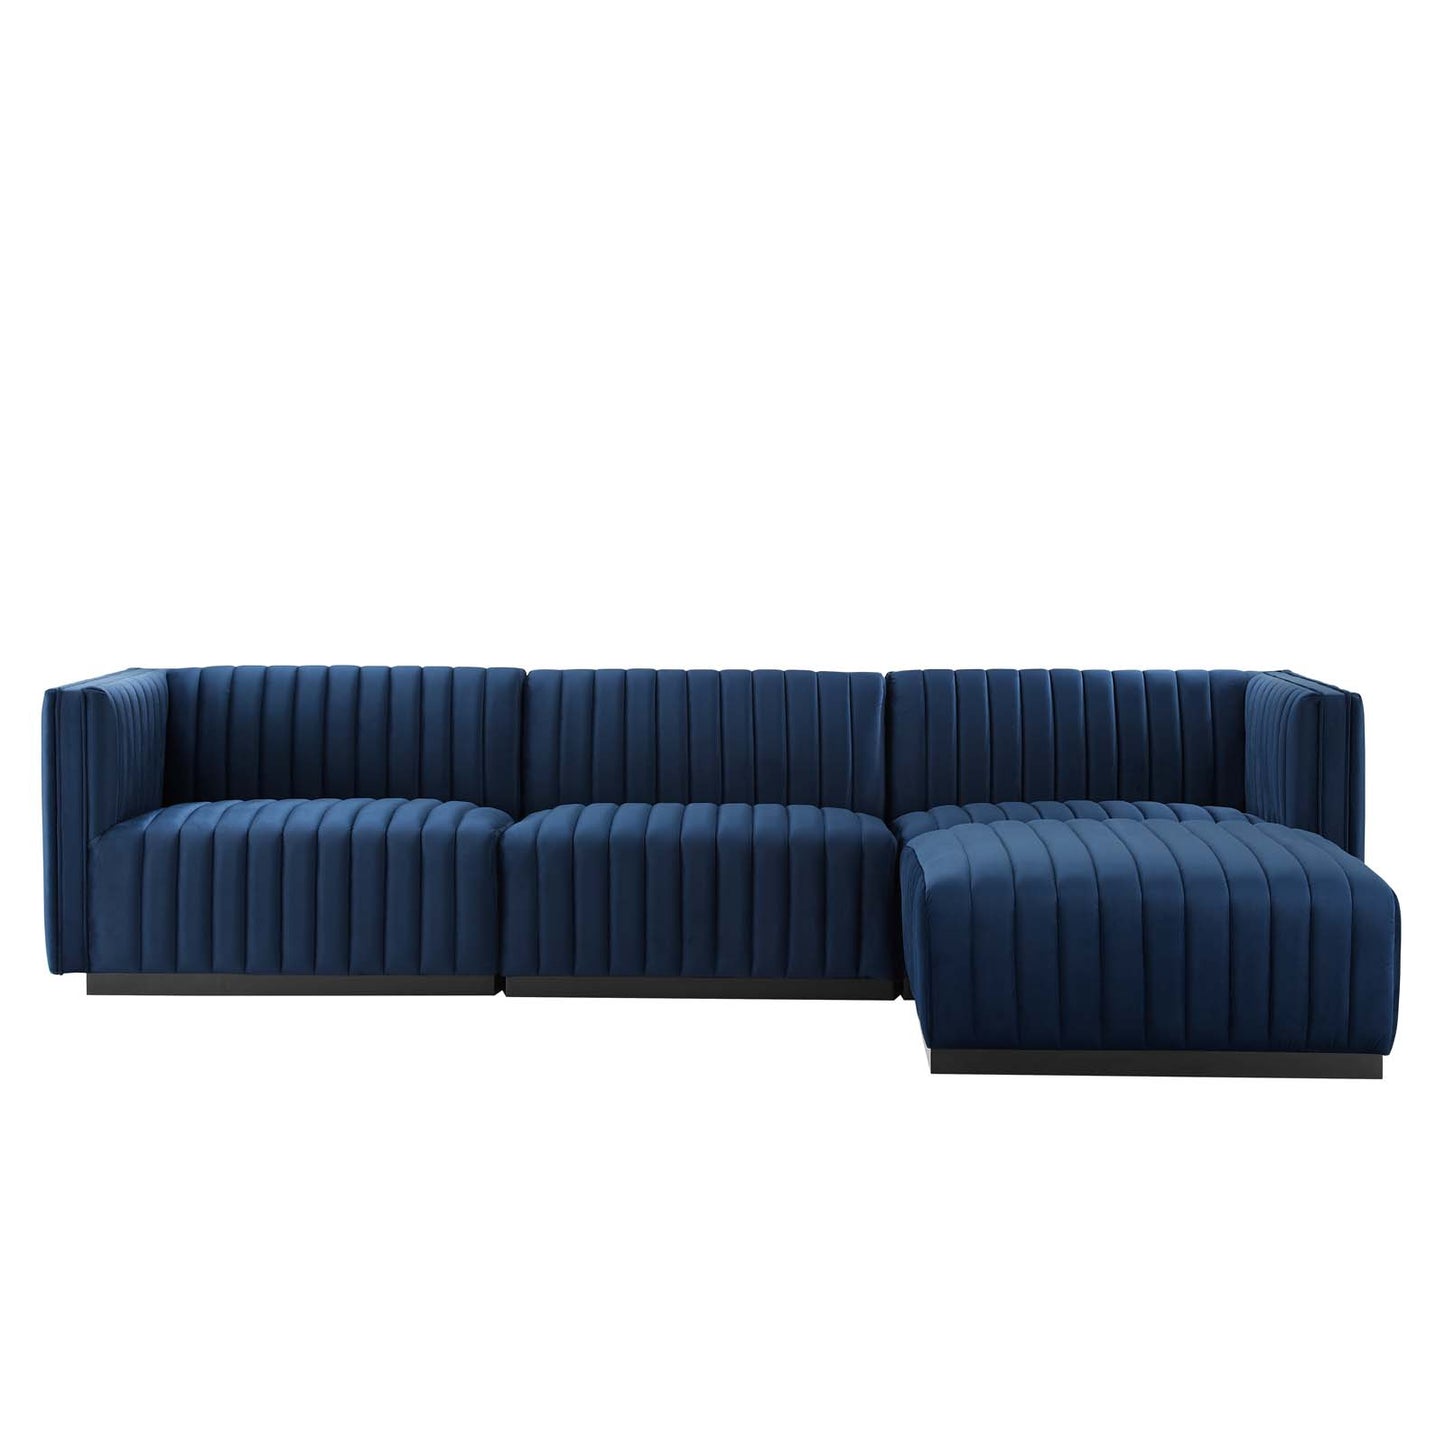 Conjure Channel Tufted Performance Velvet 4-Piece Sectional Black Midnight Blue EEI-5766-BLK-MID